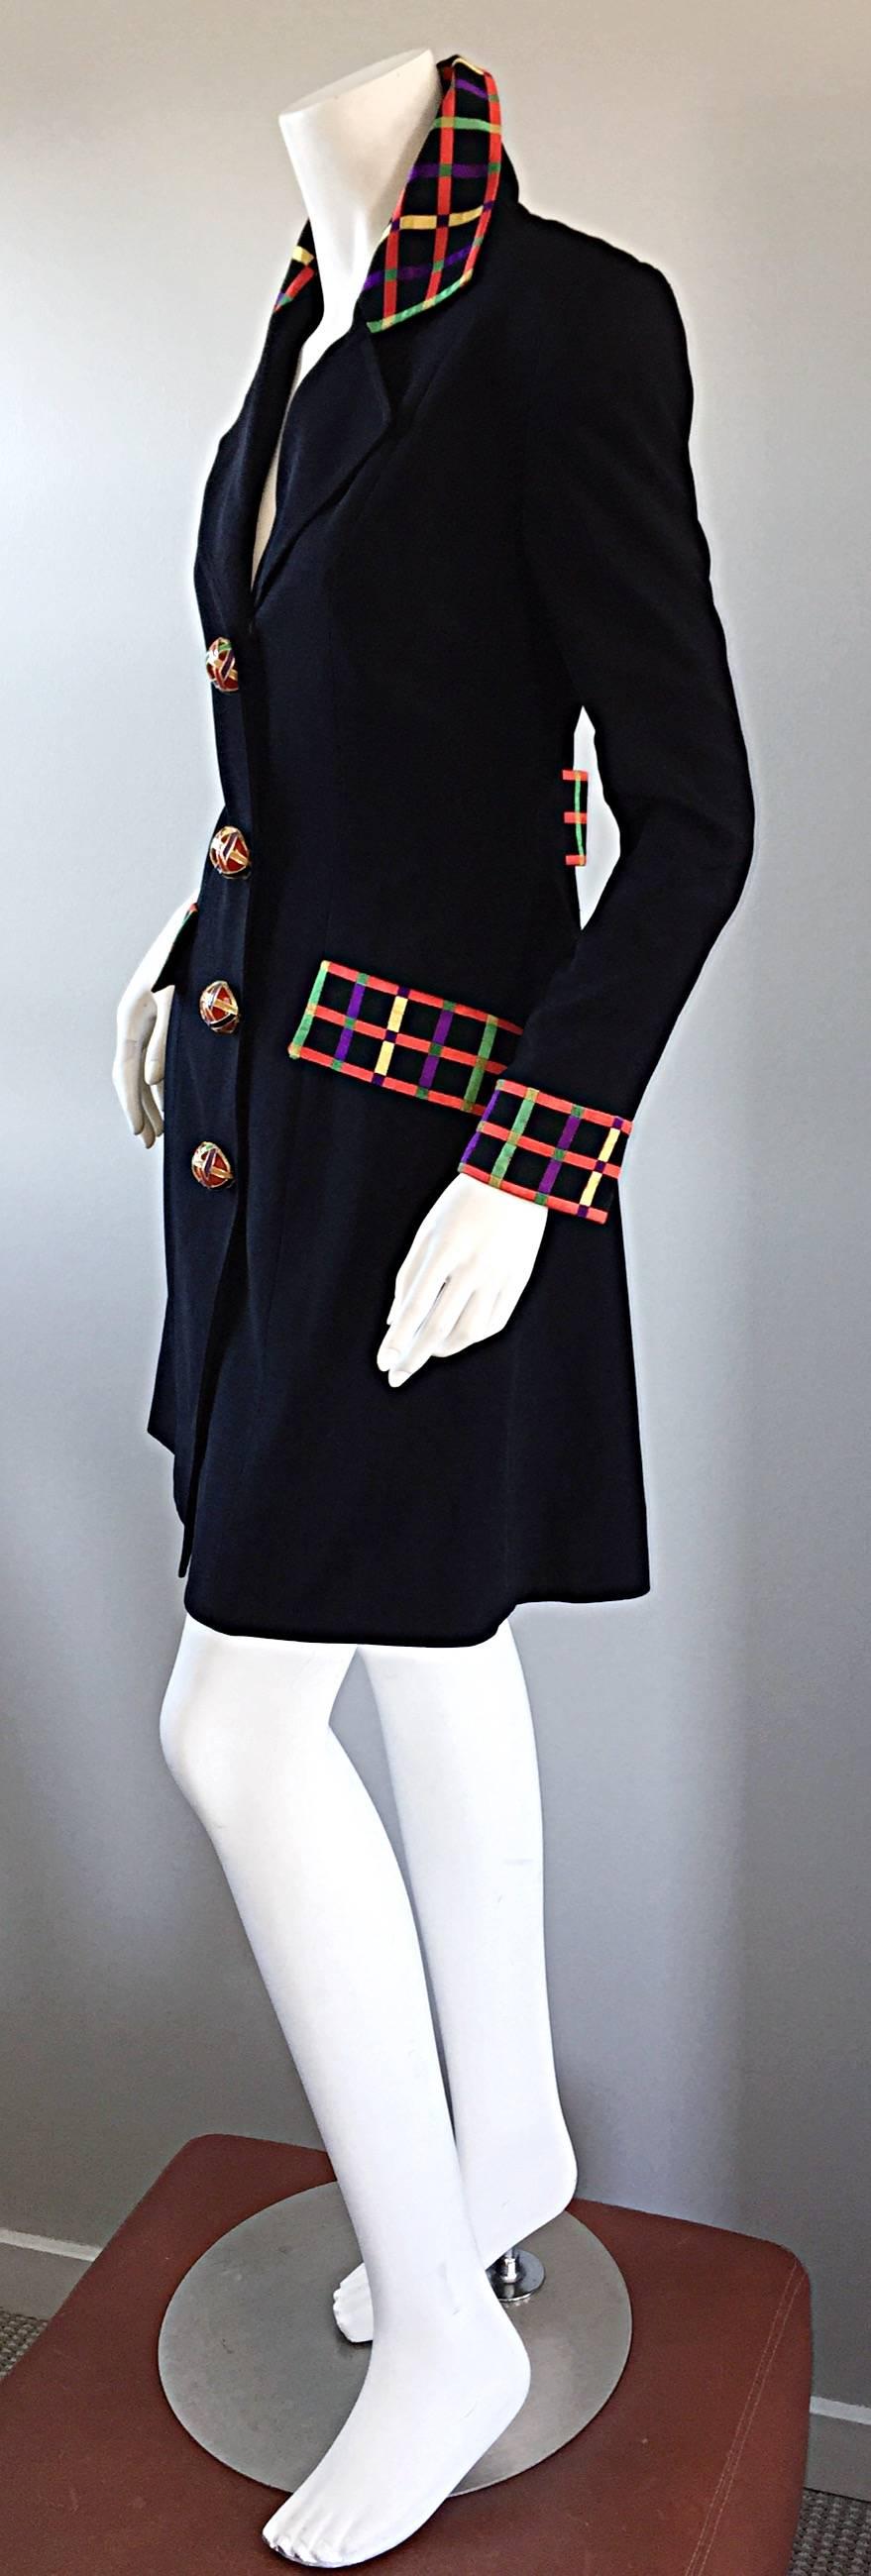 Beautiful vintage Kathryn Dianos black jacket OR dress! Avant Garde 'dome' metal buttons, with strips of color that coordinate with the plaid collar, cuffs, and pockets. Can be worn as a jacket or dress! Kathryn Dianos pieces were frequently worn by